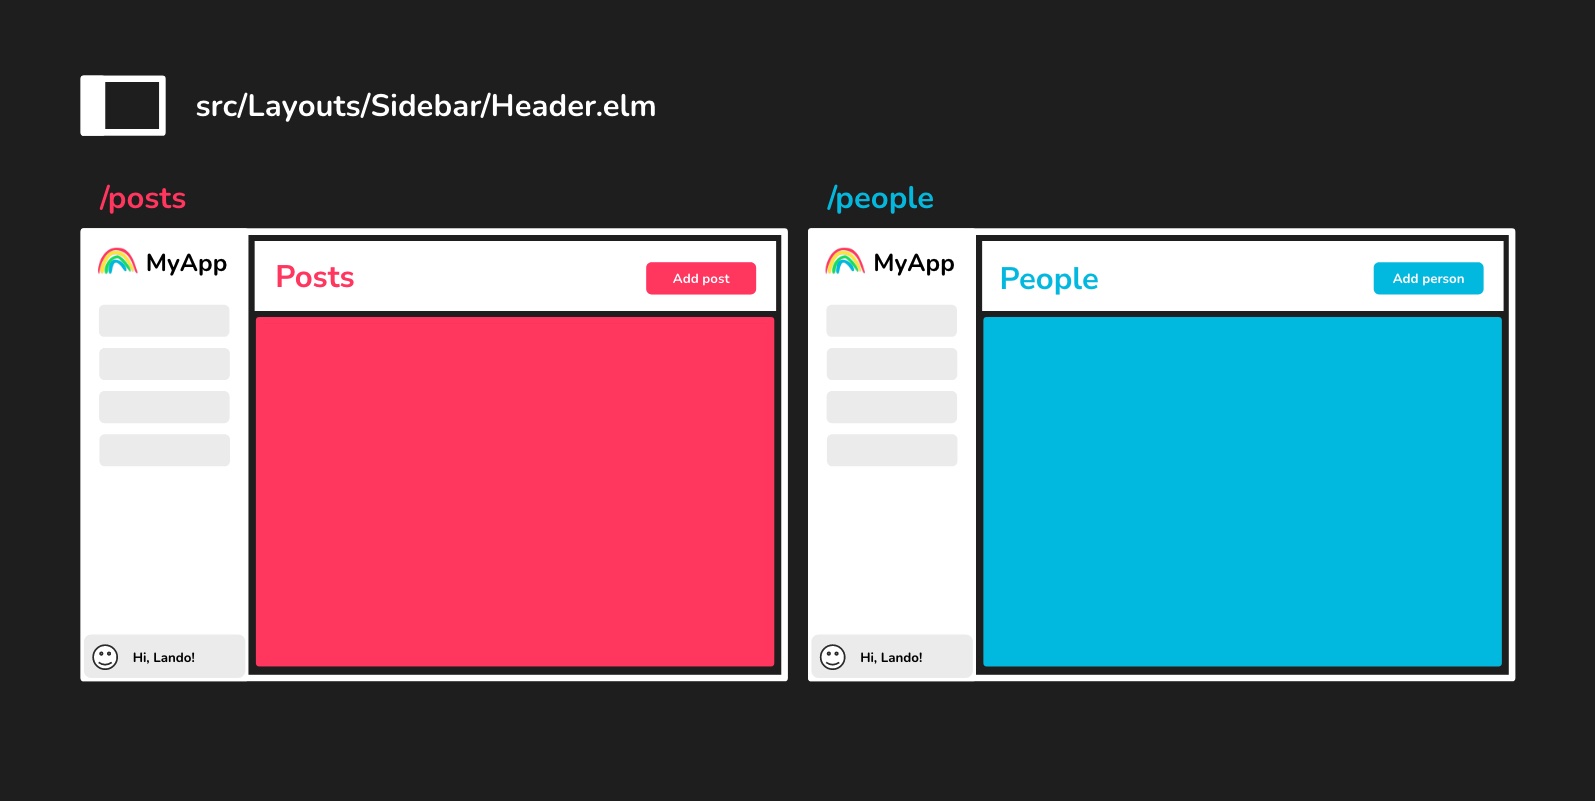 A visual of two pages using our header layout: "People" and "Posts". They each have a distinct action in the top-right. People has an "Add person" button, while Posts has an "Add post" button